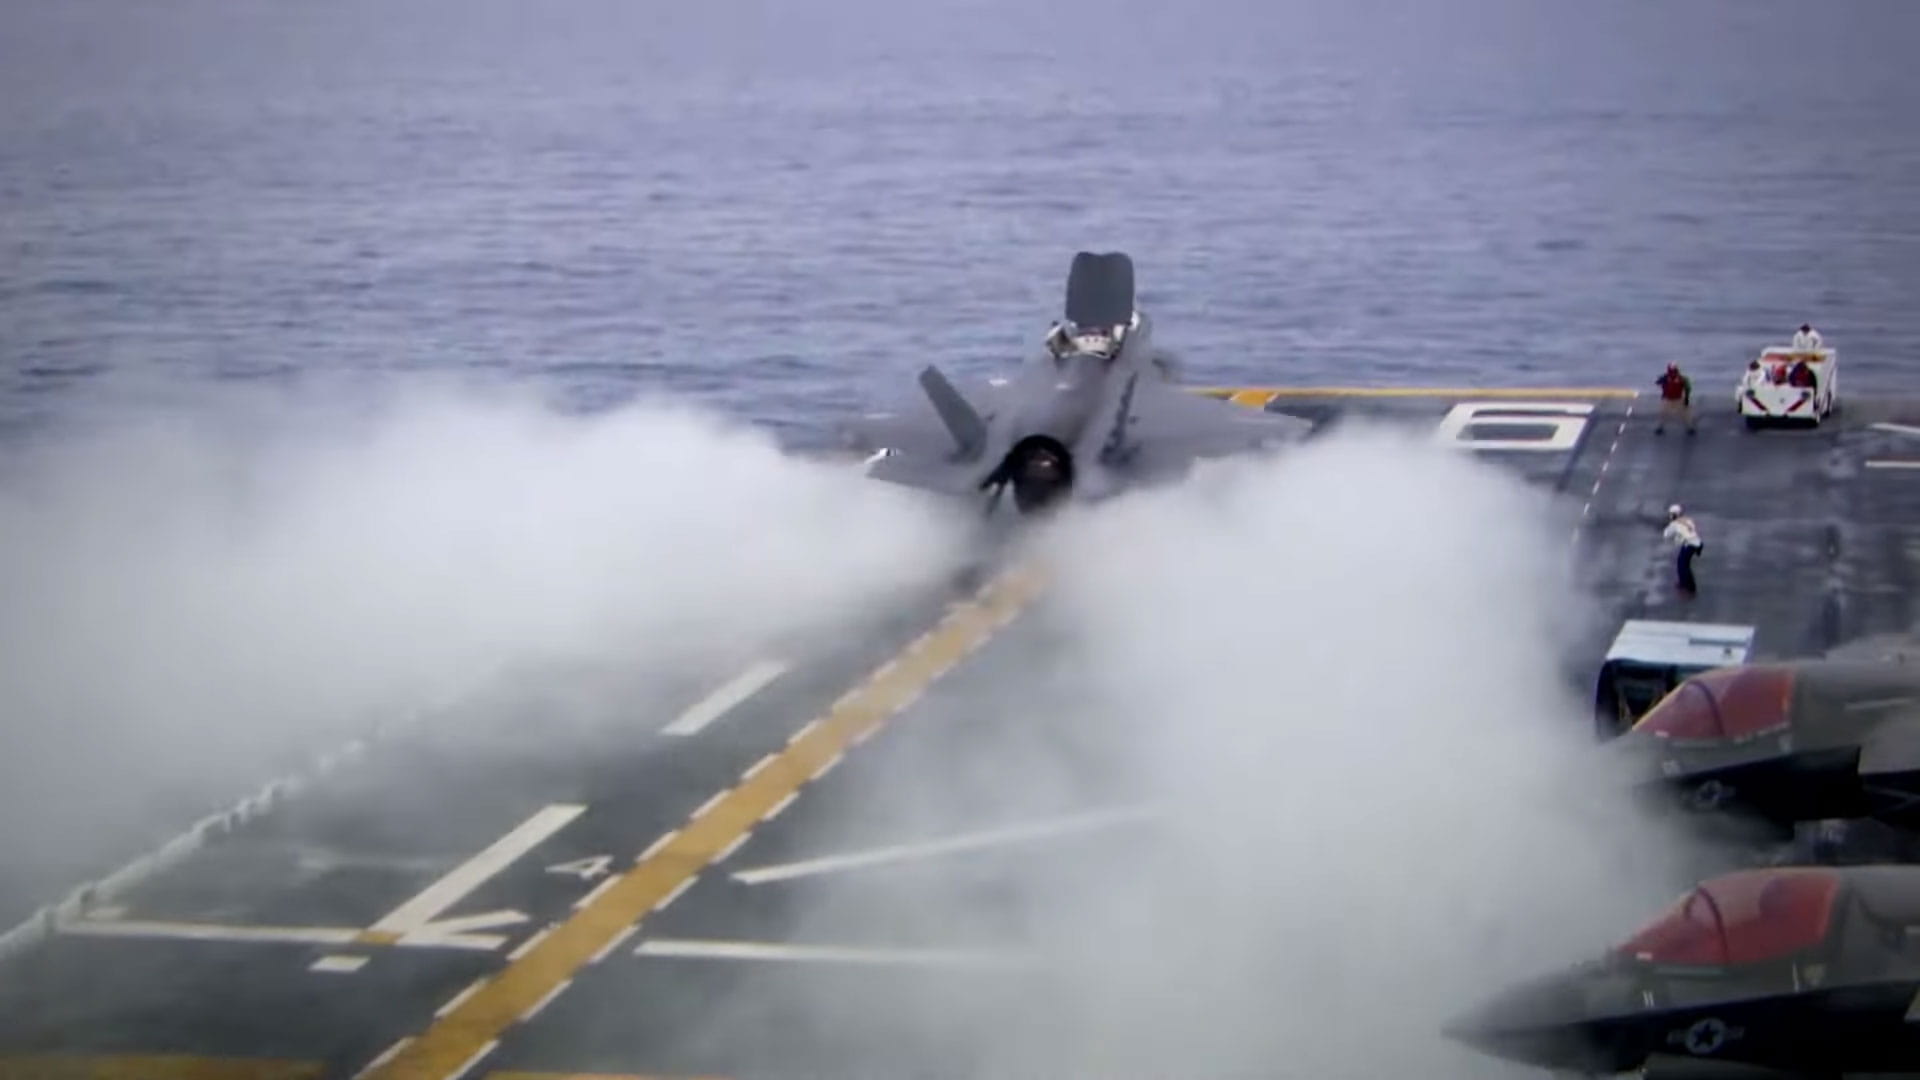 An F-35 takes off from an aircraft carrier